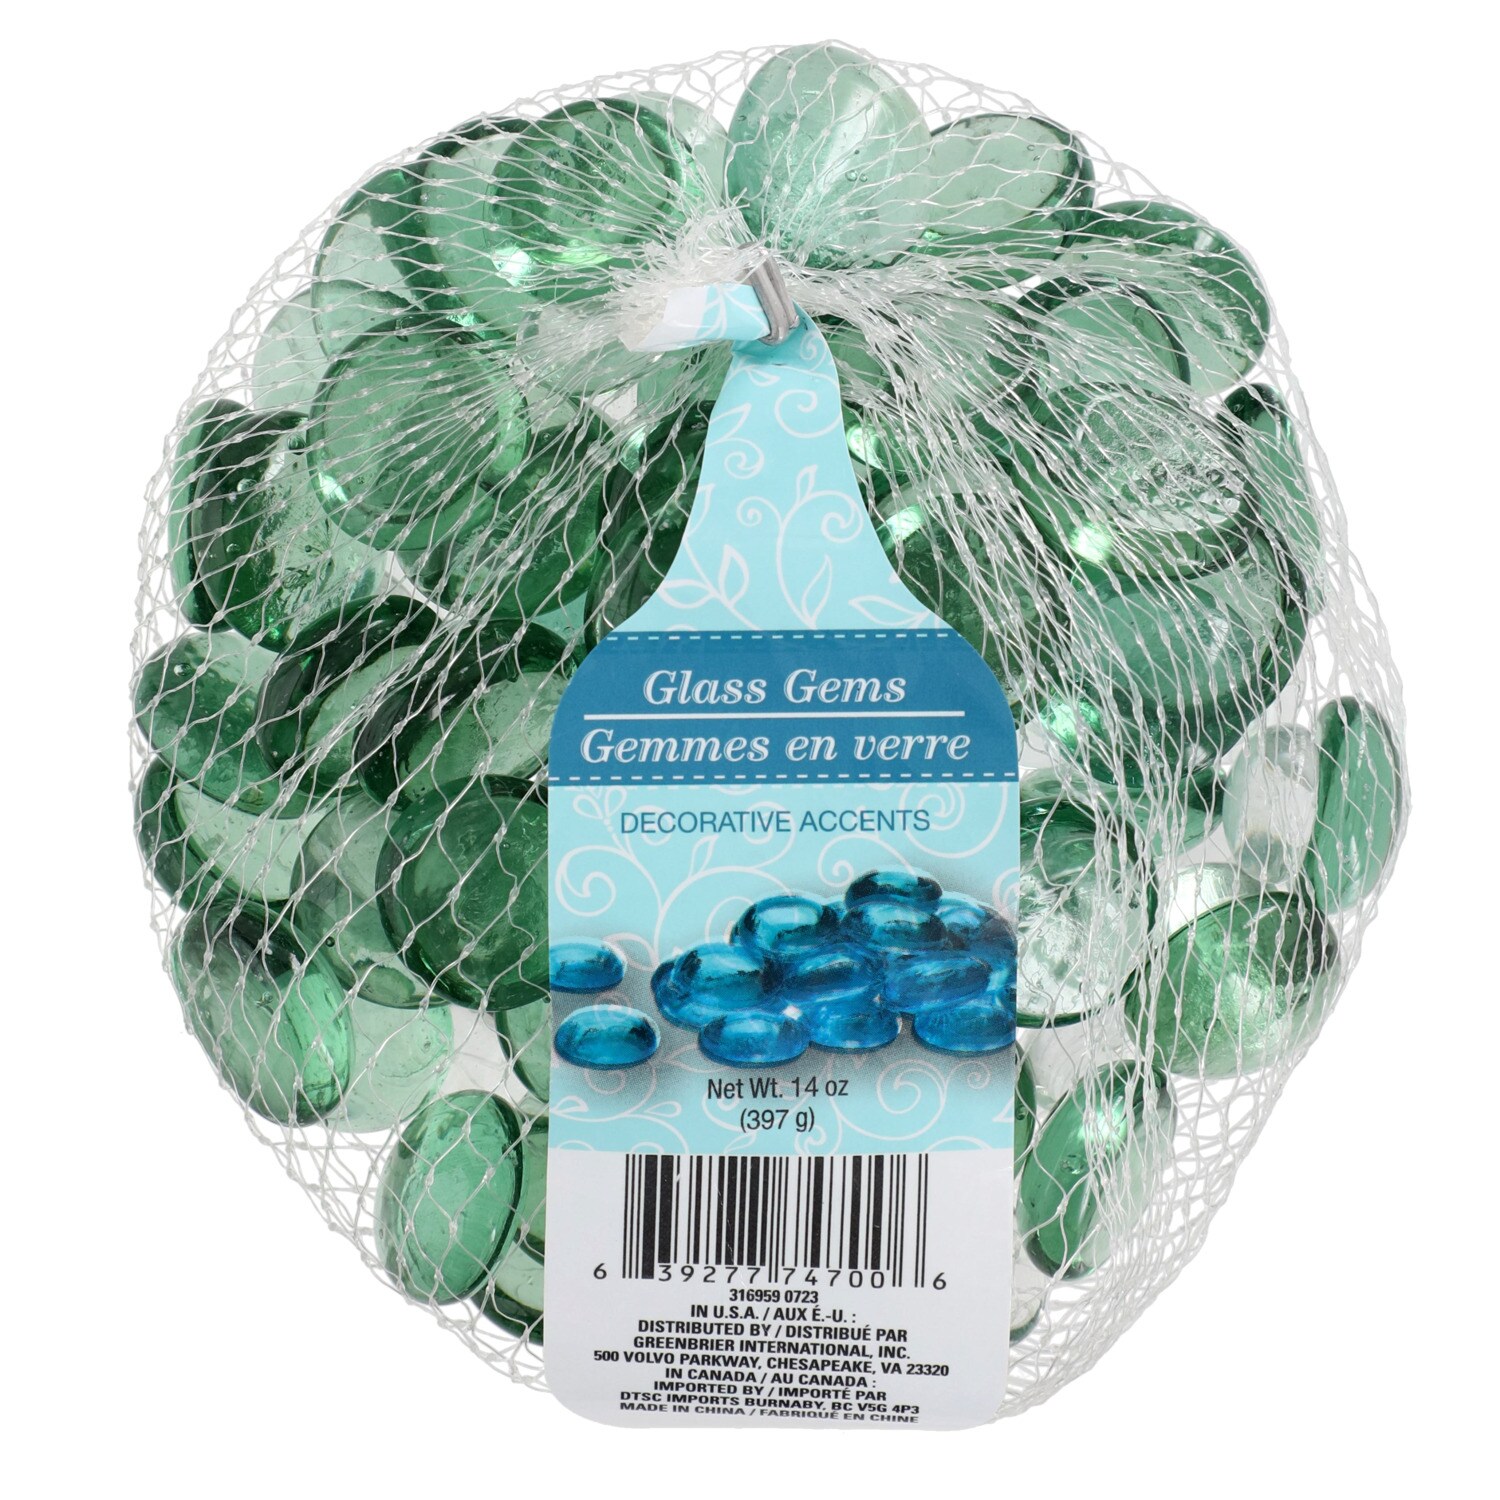 Greenbrier Intl Crafters Square Aquamarine Glass Accent Gems Bags 2-14-oz 